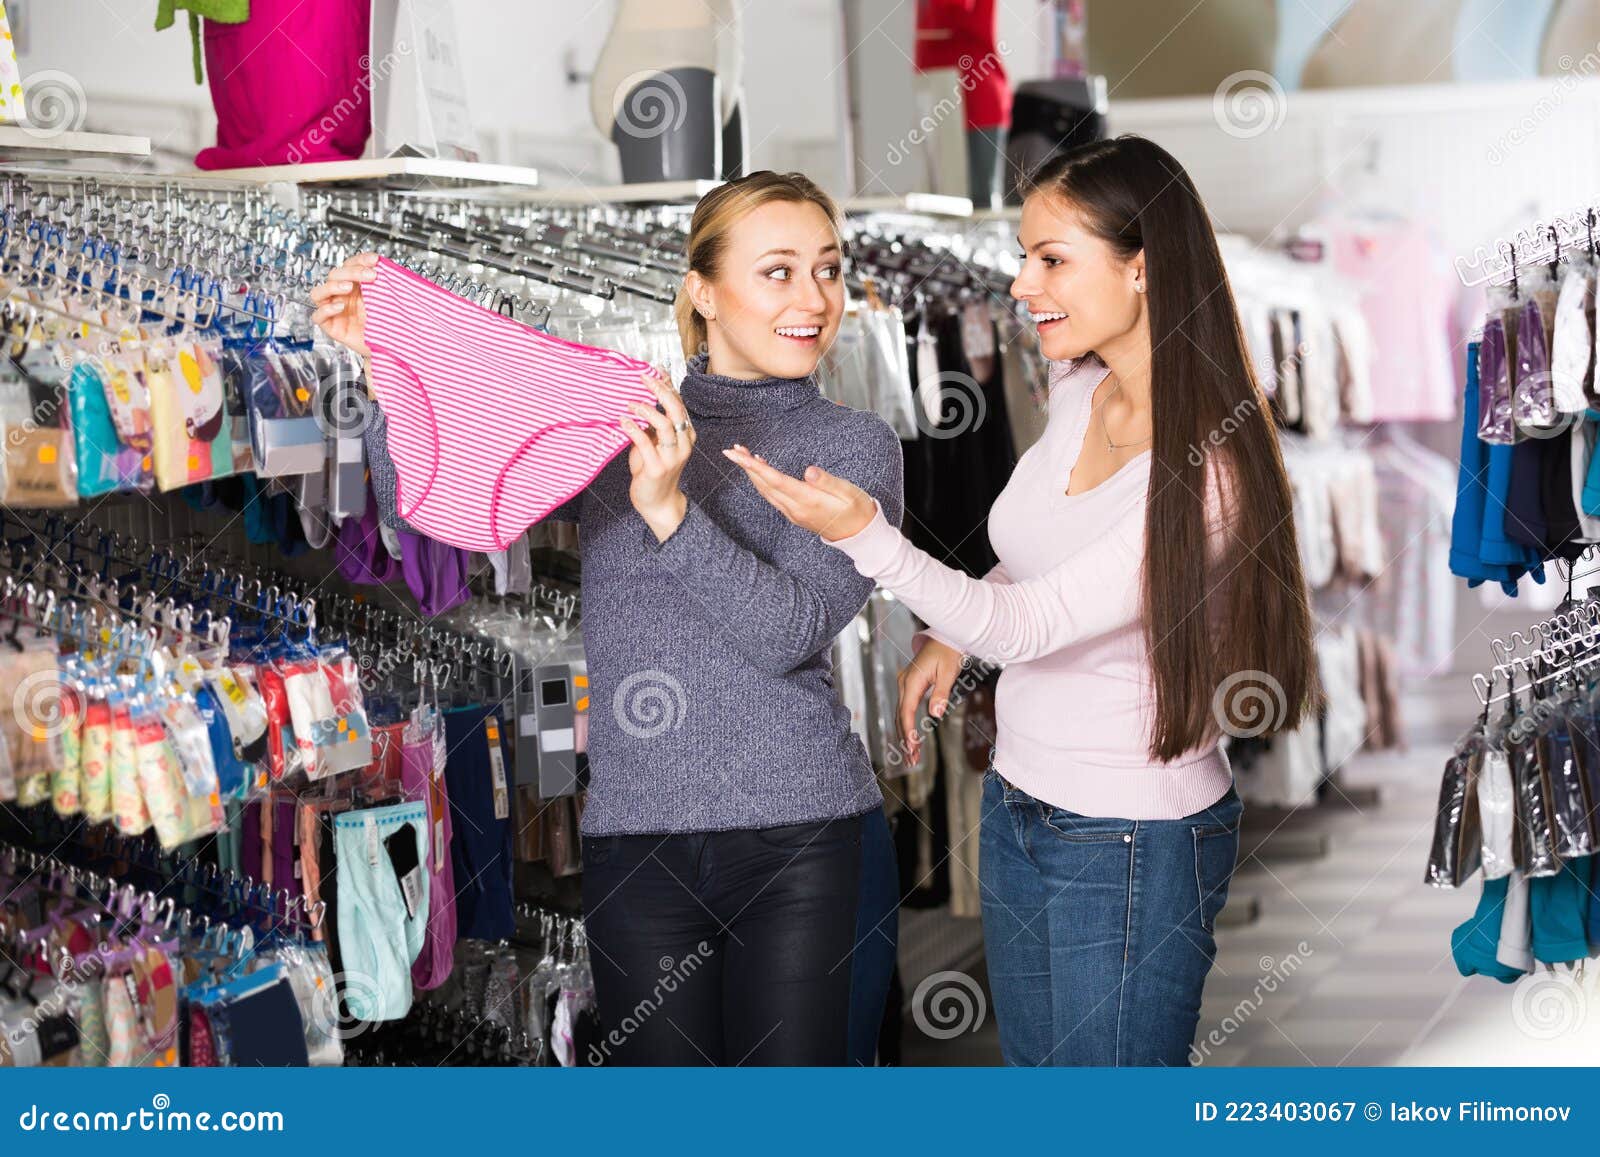 Young Happy Girl Buying Pants In Clothing Store Stock Photo, Picture and  Royalty Free Image. Image 44788038.